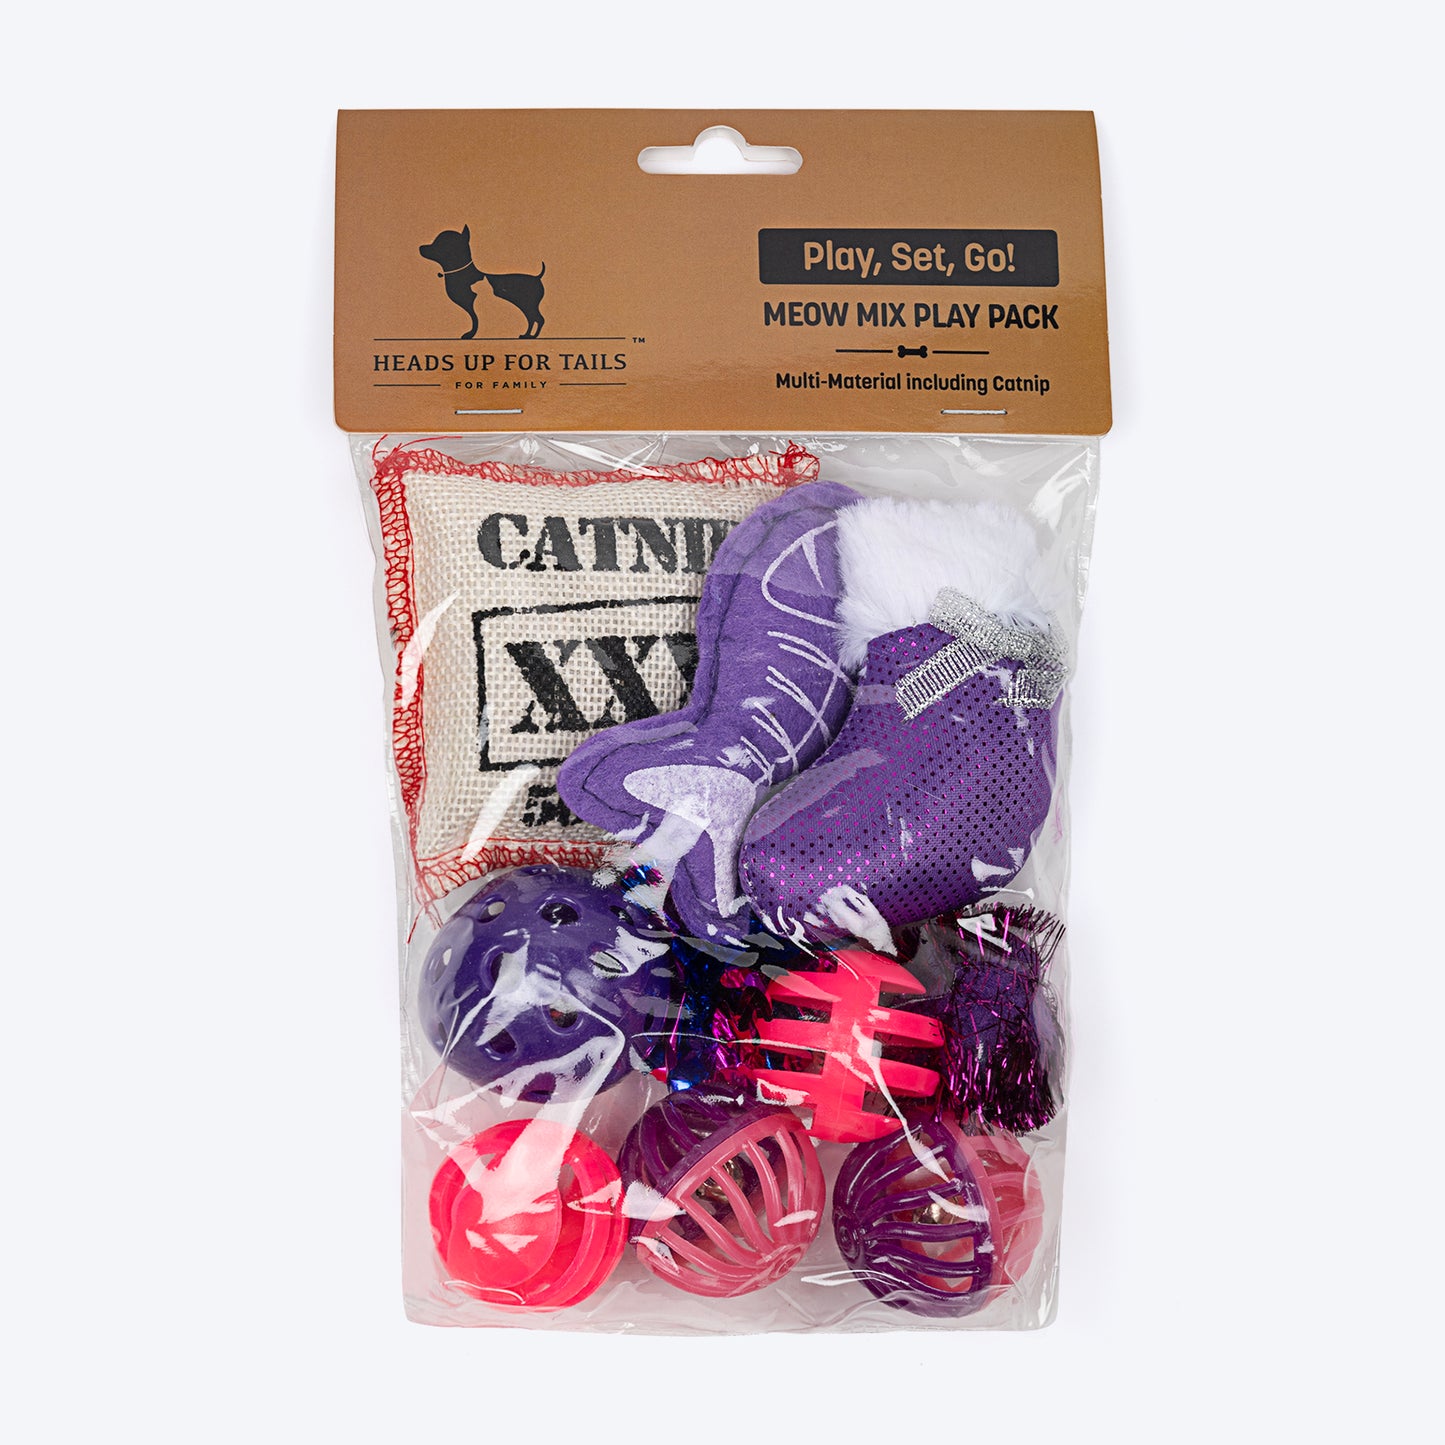 HUFT Meow Mix Play Pack Assorted (With Catnip Inside) Cat Toy - Pack of 10_07